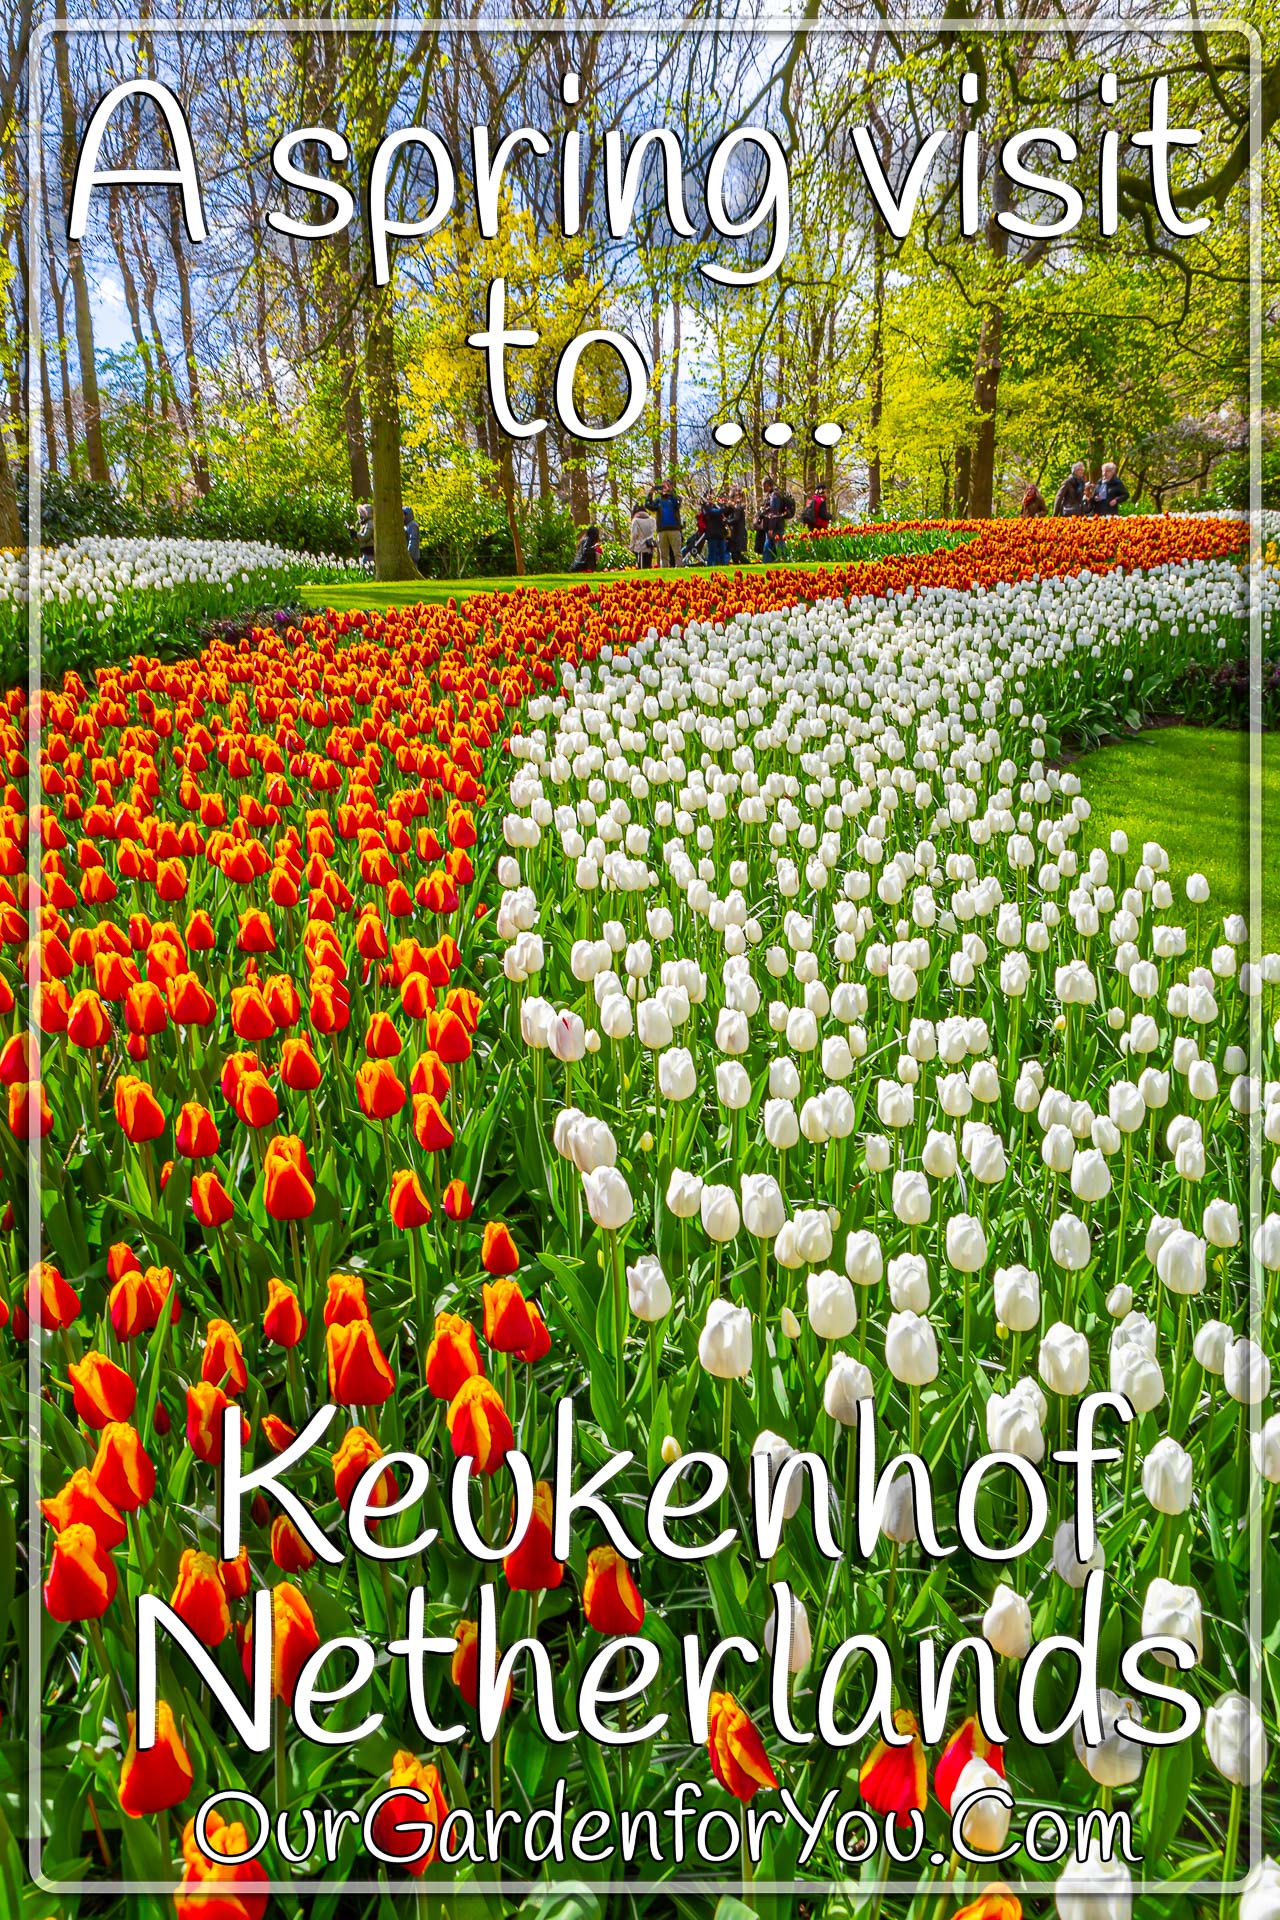 The pin image for our post - 'A spring visit to Keukenhof, Netherlands